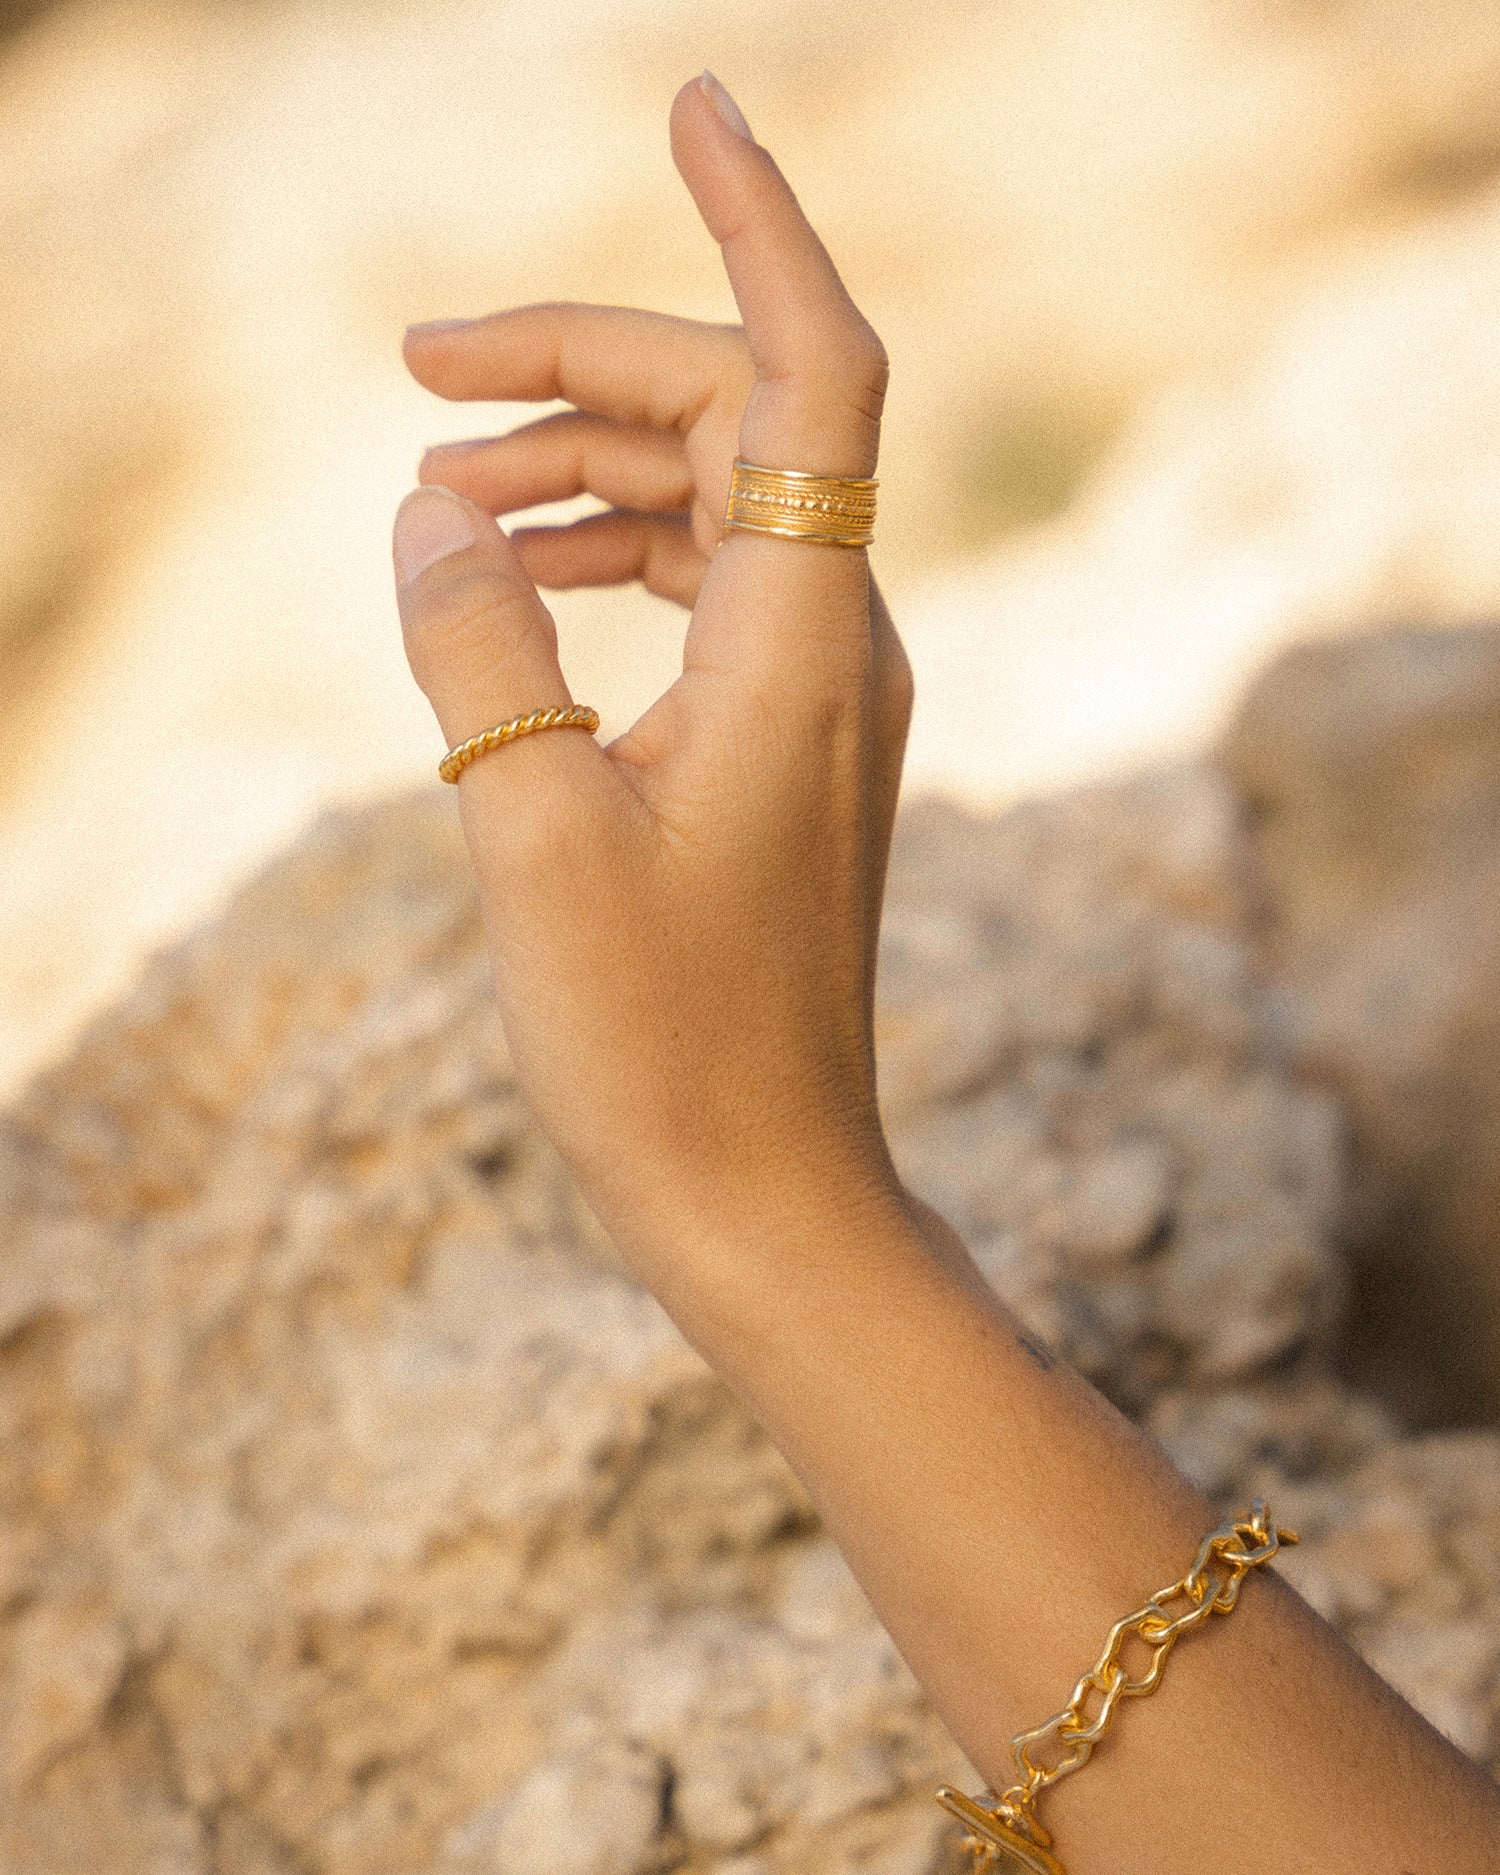 Elodie Chain Stacking Ring | Sustainable Jewellery by Ottoman Hands